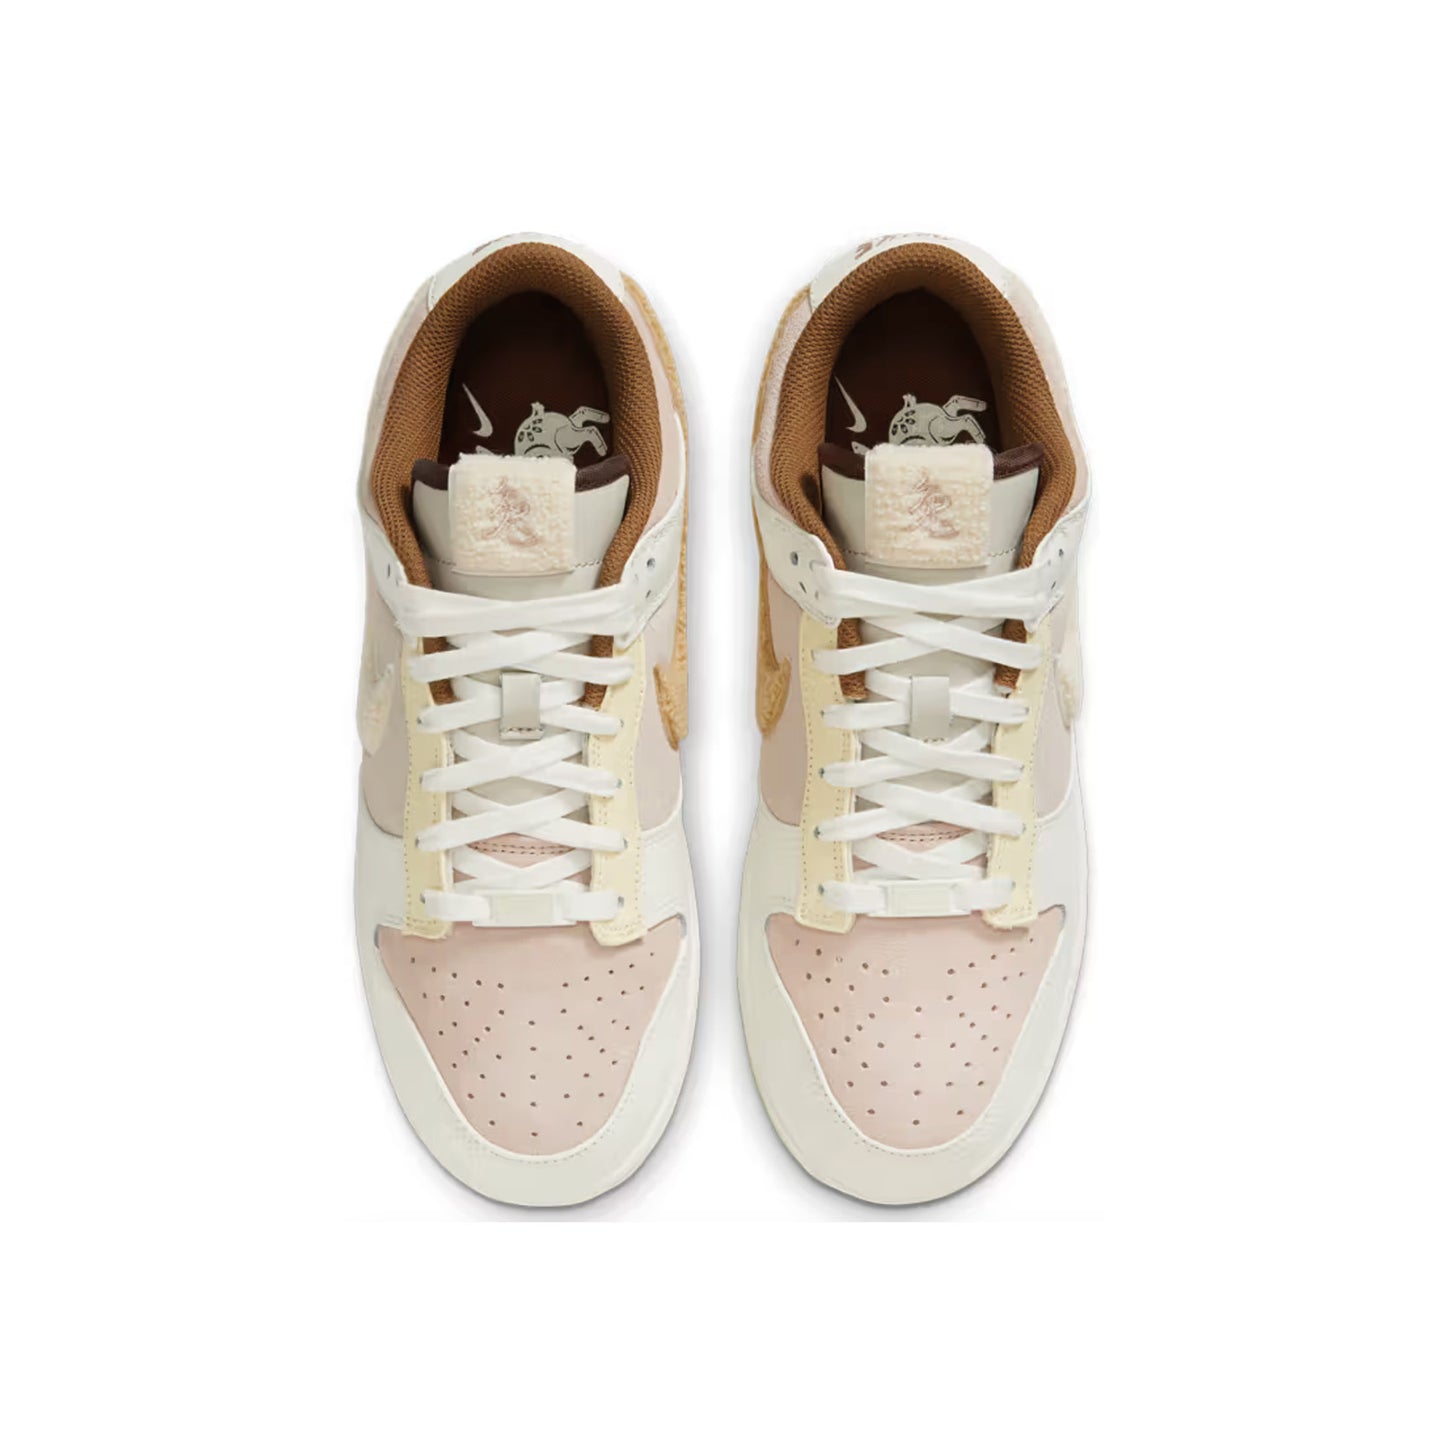 Nike Dunk Low Year of the Rabbit 'Beige/Sail'